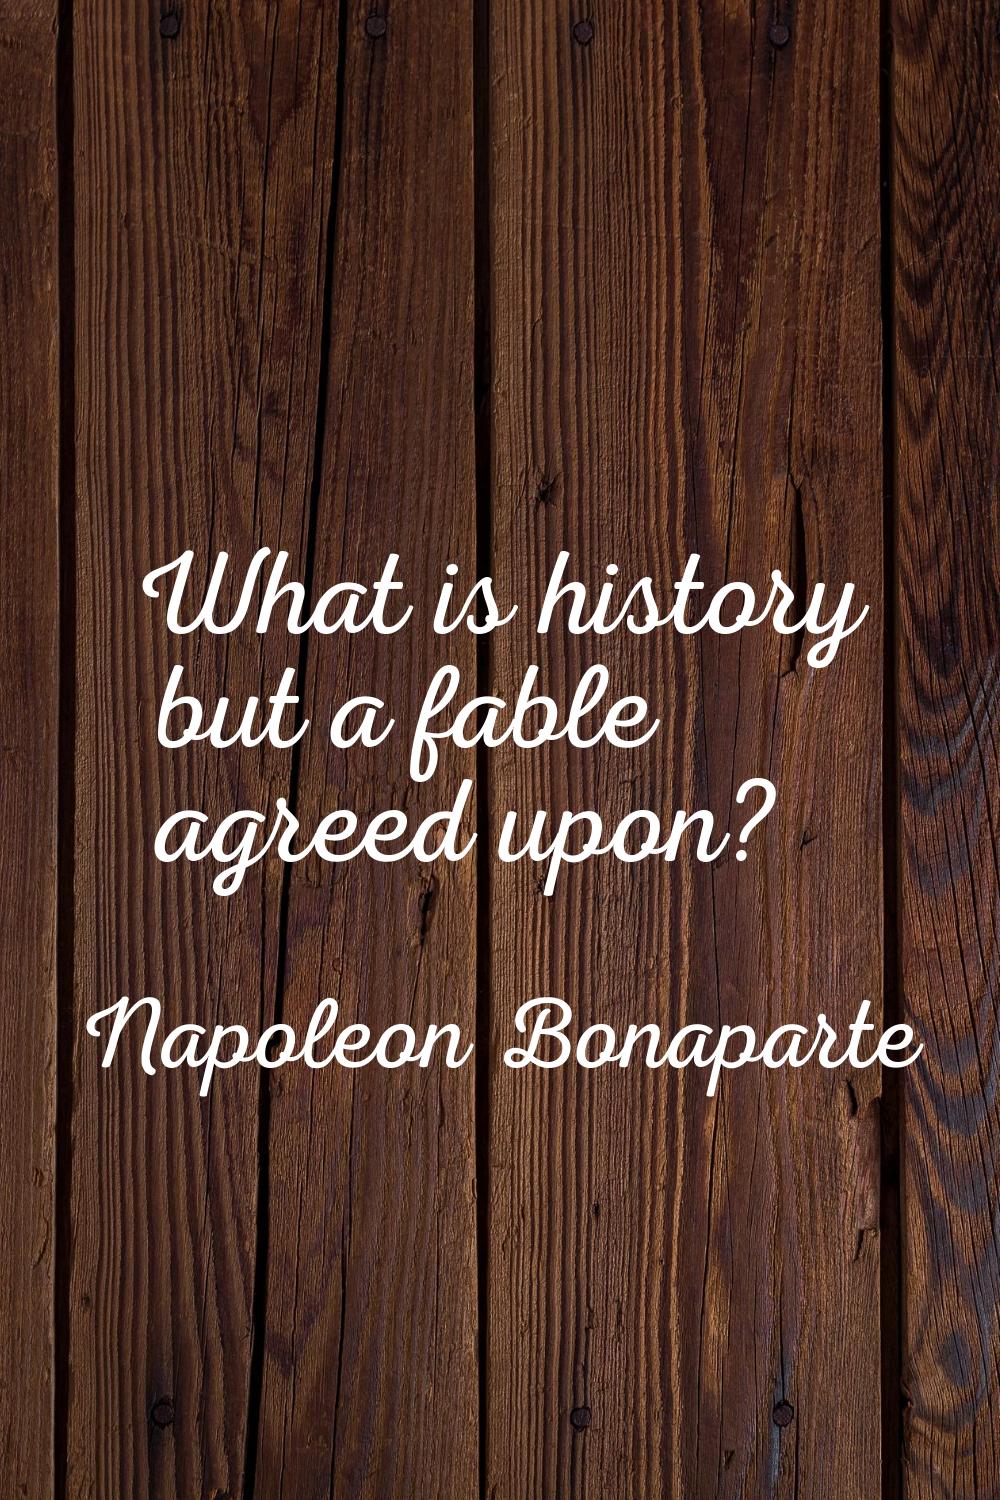 What is history but a fable agreed upon?